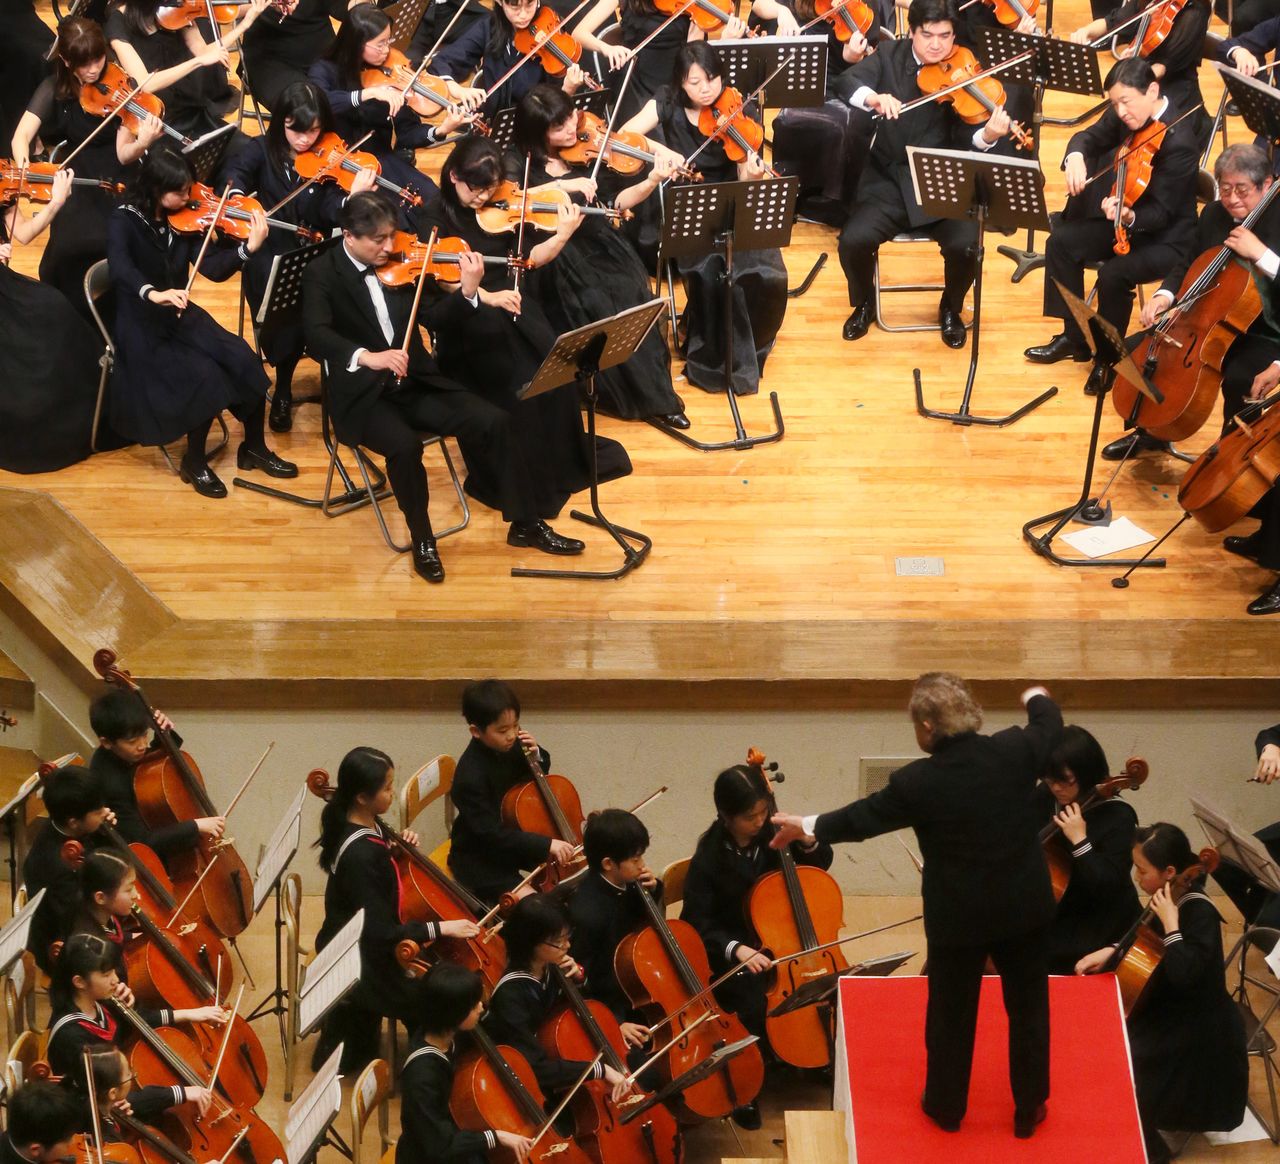 Crown Prince Naruhito (second from right on stage) and Princess Aiko (fourth from the stage at bottom left) perform together at a Gakushūin concert in April 2013. (© Jiji; pool photo)